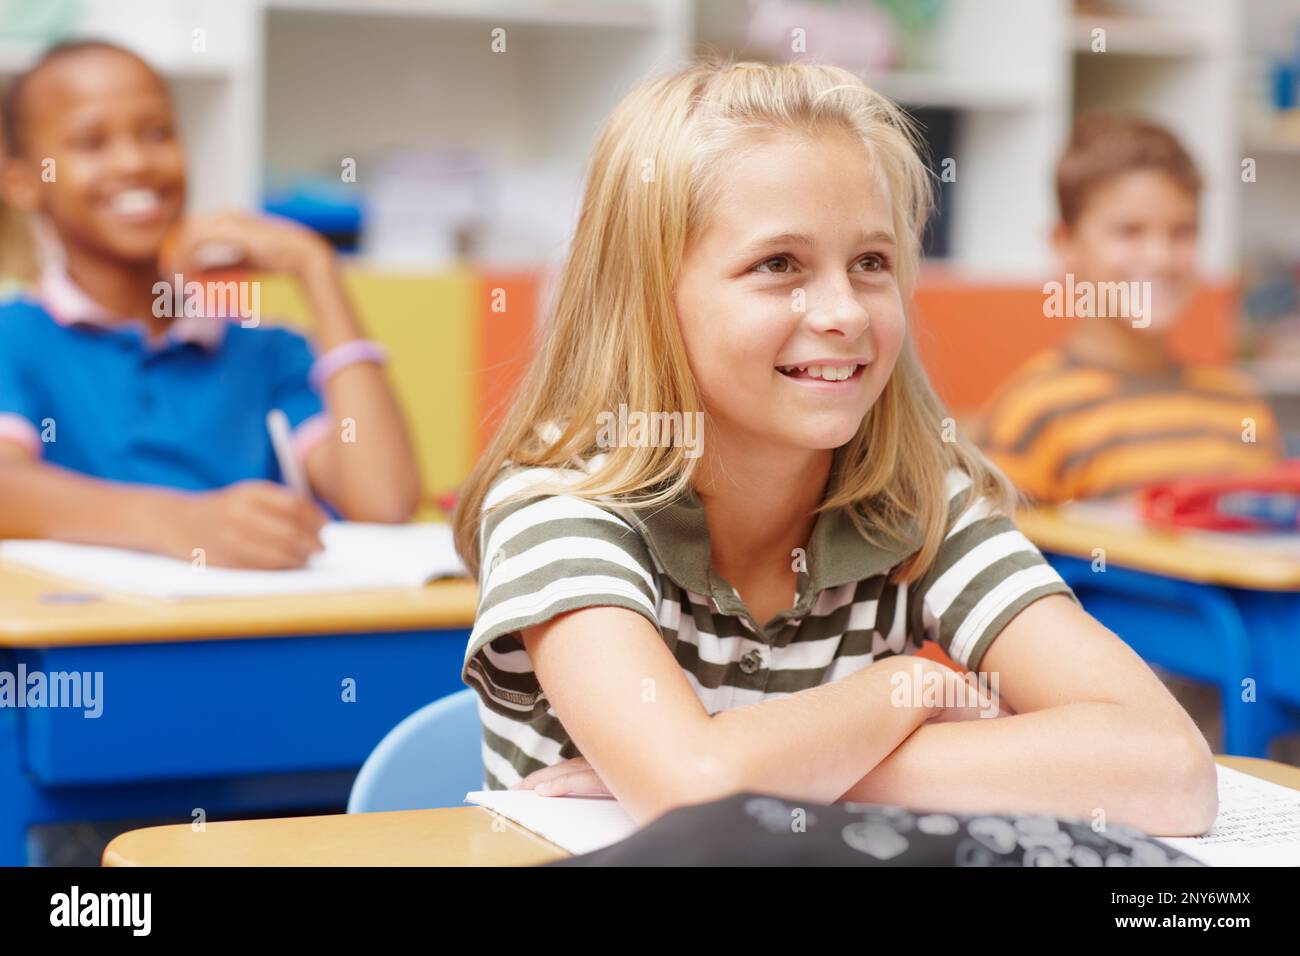 This school offers an inspiring education. Young blonde girl paying attention in class and smiling while enjoying a lesson- copyspace. Stock Photo